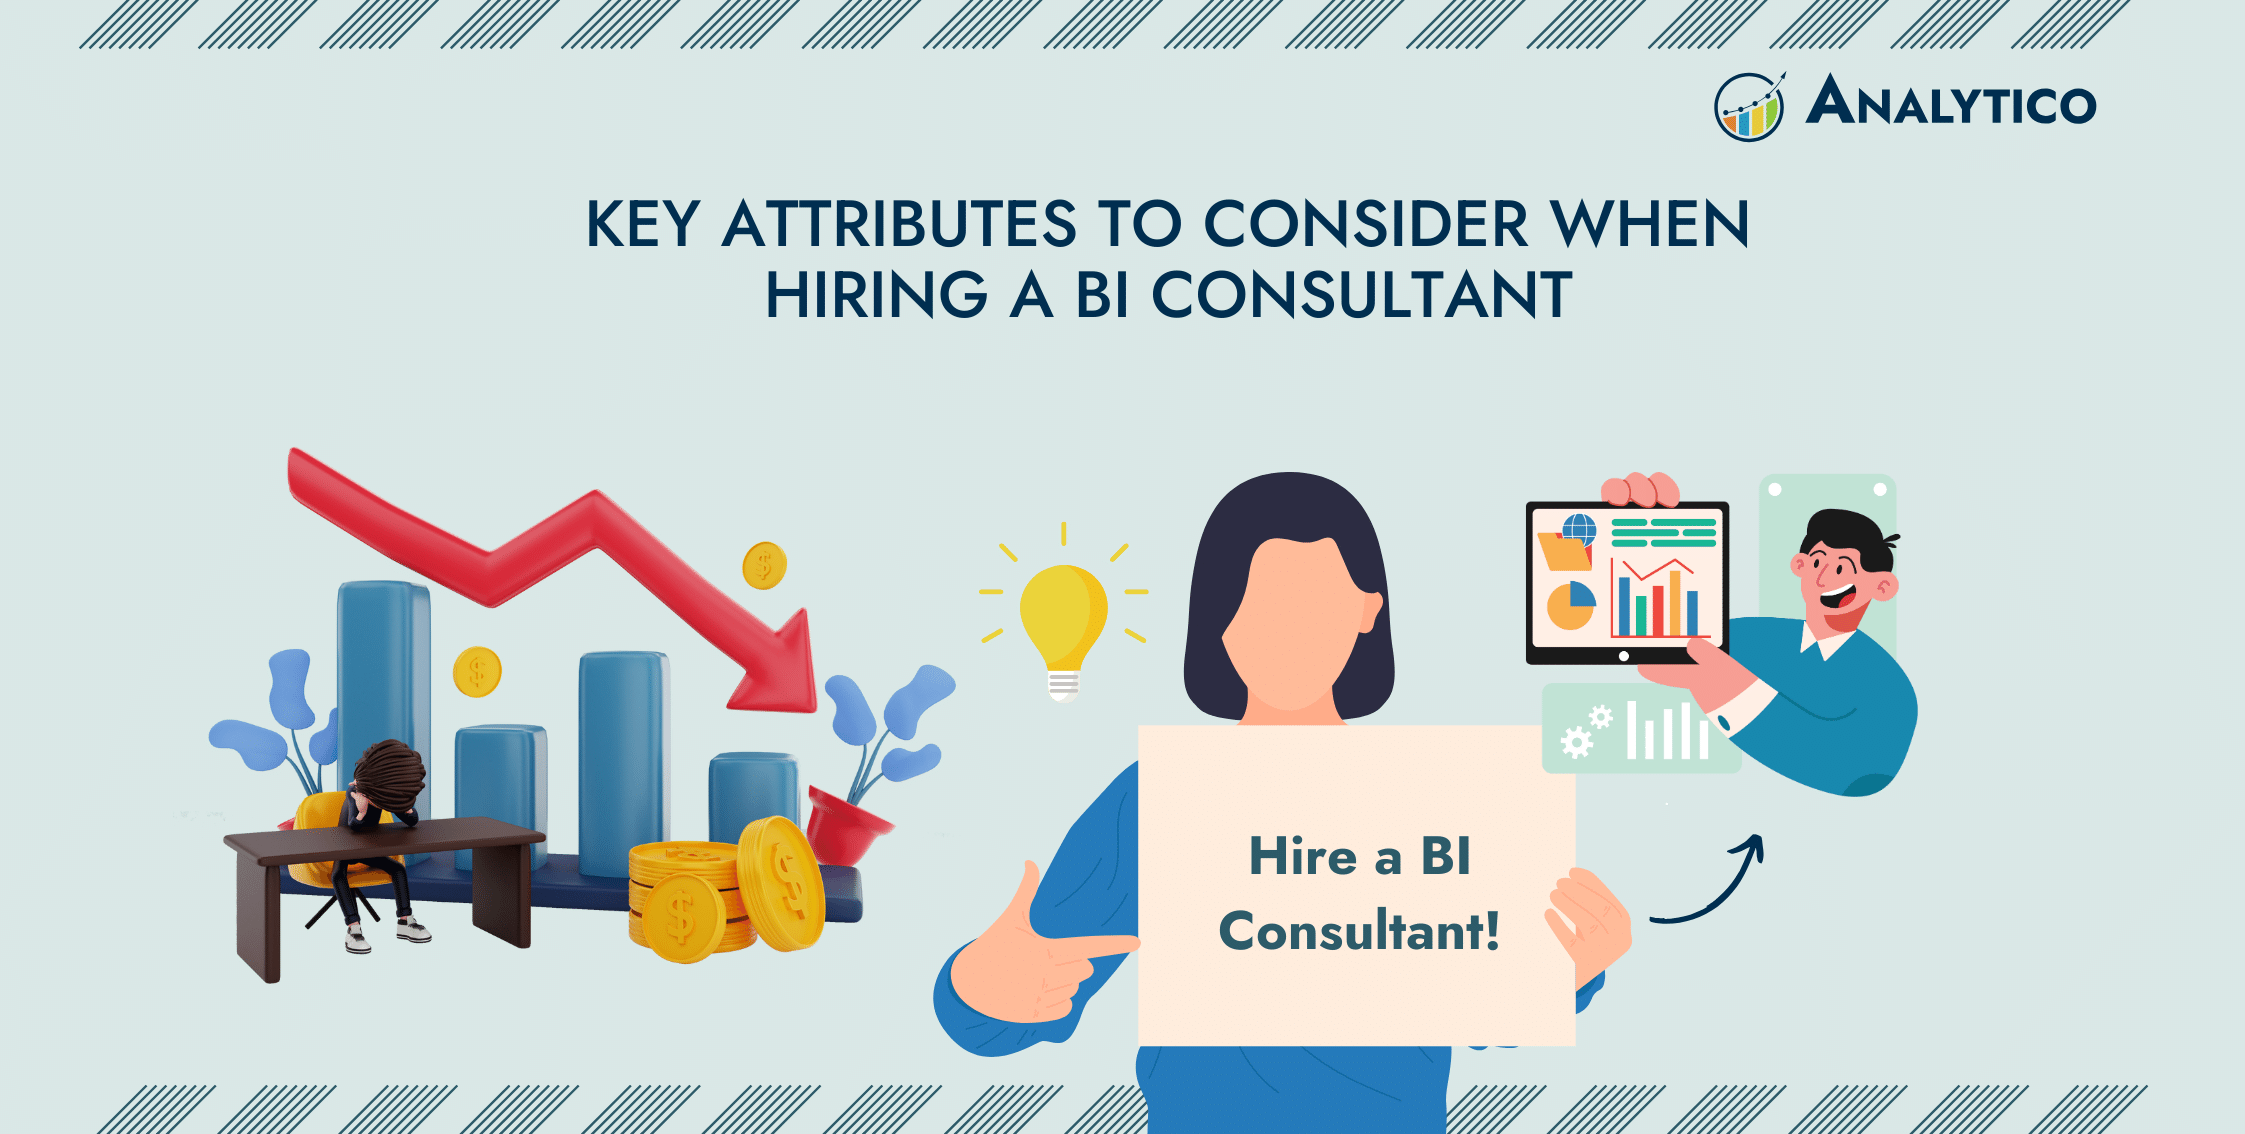 Key Attributes to Consider When Hiring a BI Consultant